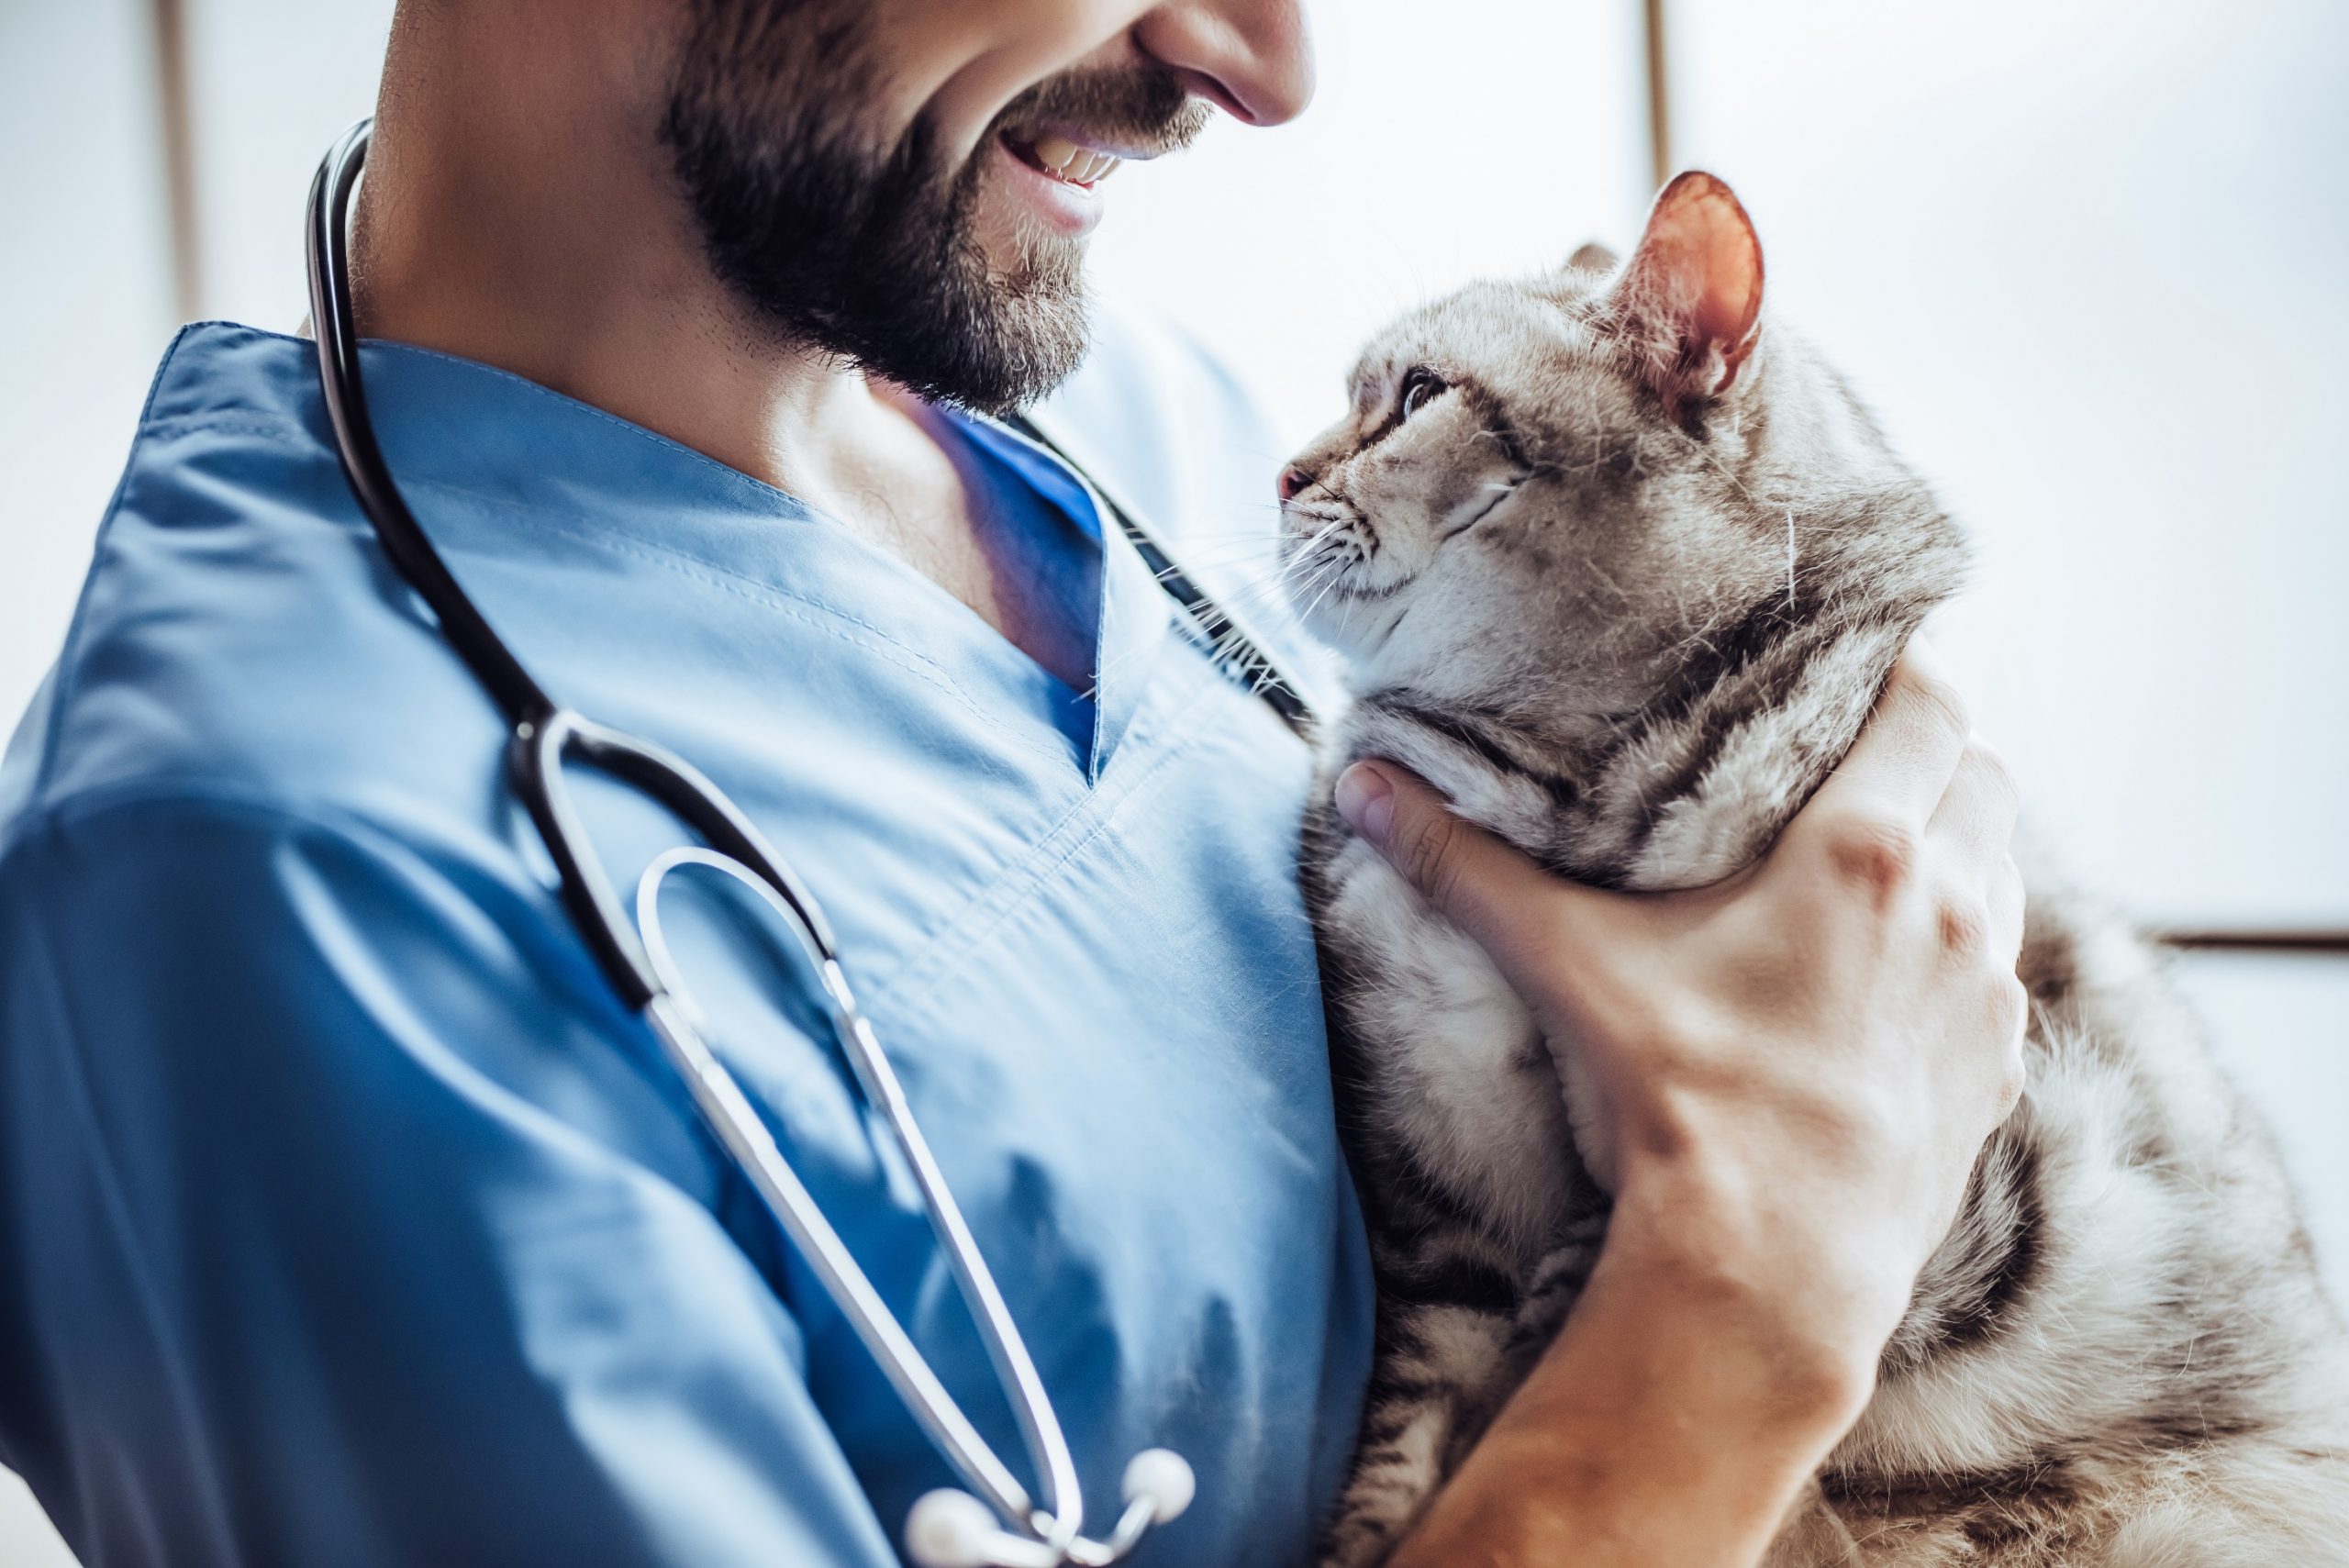 Signs You Need To See The Vet ASAP